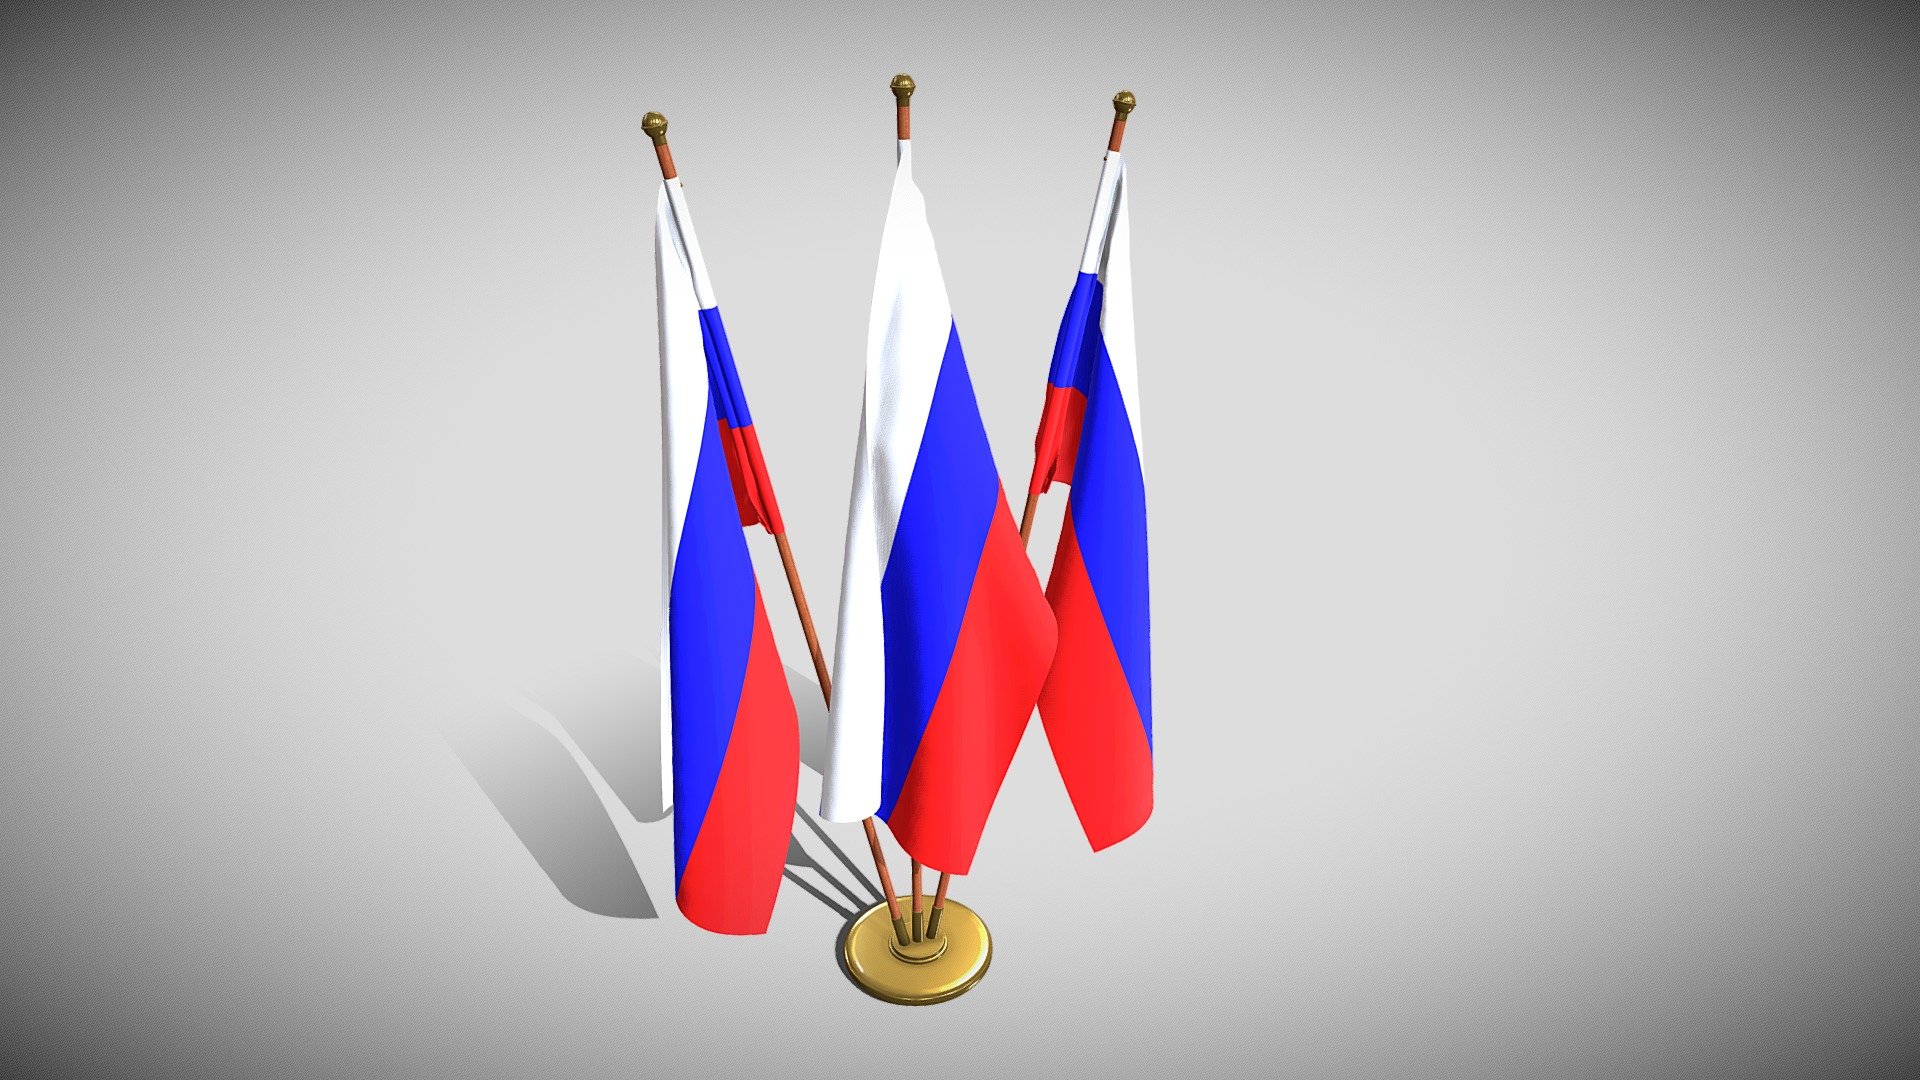 Set of four flag setups(exterior flag and three different office flags).

File formats:
-.blend, rendered with cycles, as seen in the images;
-.obj, with materials applied and textures;
-.dae, with materials applied and textures;
-.fbx, with material slots applied;
-.stl;

3D Software:
This 3d model was originally created in Blender 2.79 and rendered with Cycles.

Materials and textures:
The model has materials applied in all formats, and is ready to import and render . The model comes with multiple png image textures.

Preview scenes:
The preview images are rendered in Blender using its built-in render engine &lsquo;Cycles'.
Note that the blend files come directly with the rendering scene included and the render command will generate the exact result as seen in previews.
The flags are on different layer each for convenience. For each format there are separate files for each of the four flag setups 3d model